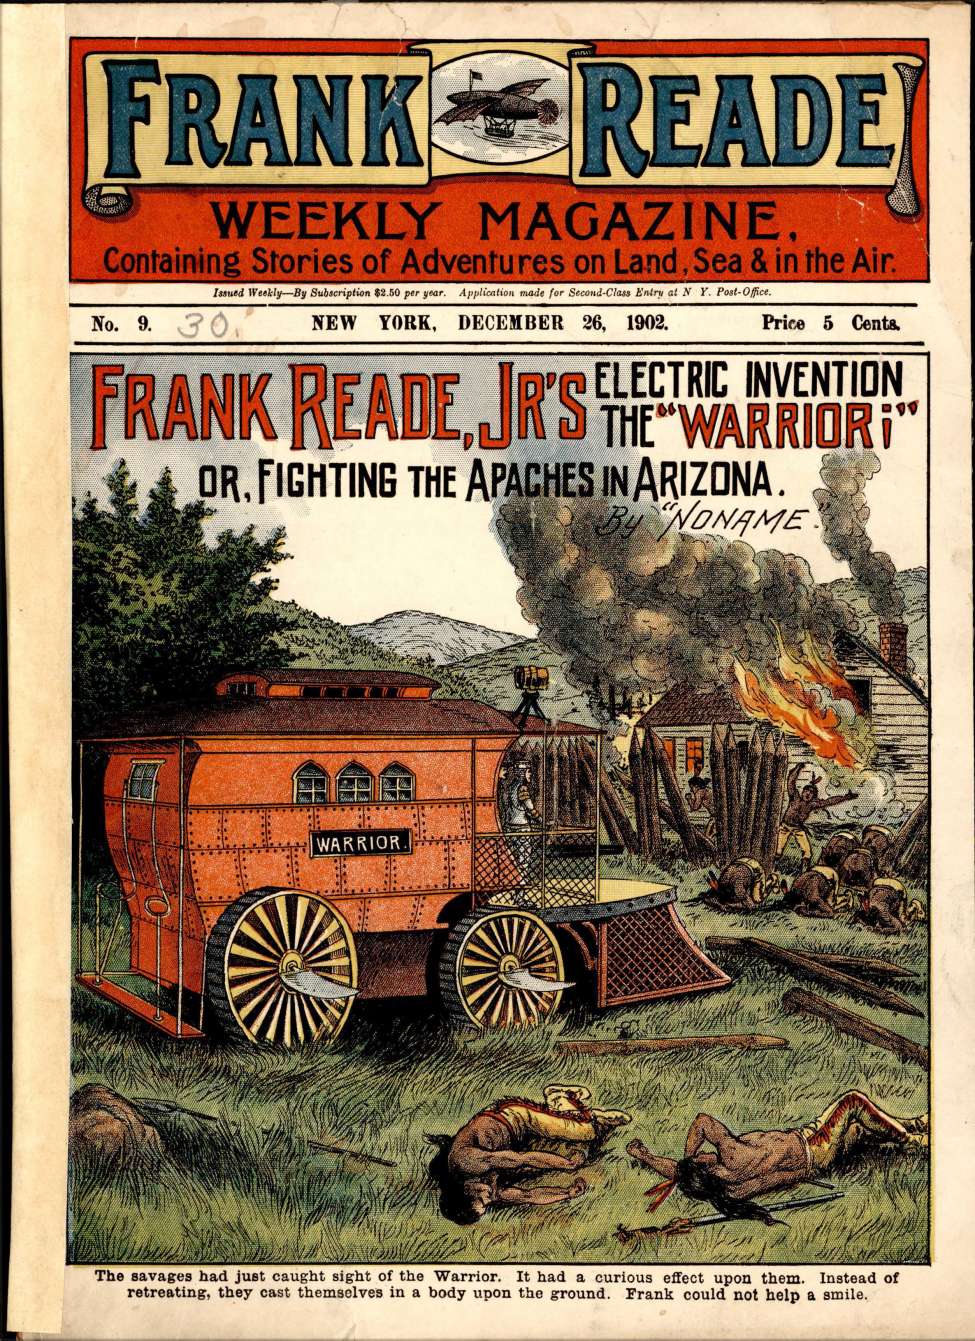 Book Cover For v1 9 - Frank Reade, Jr's Electric Invention the Warrior